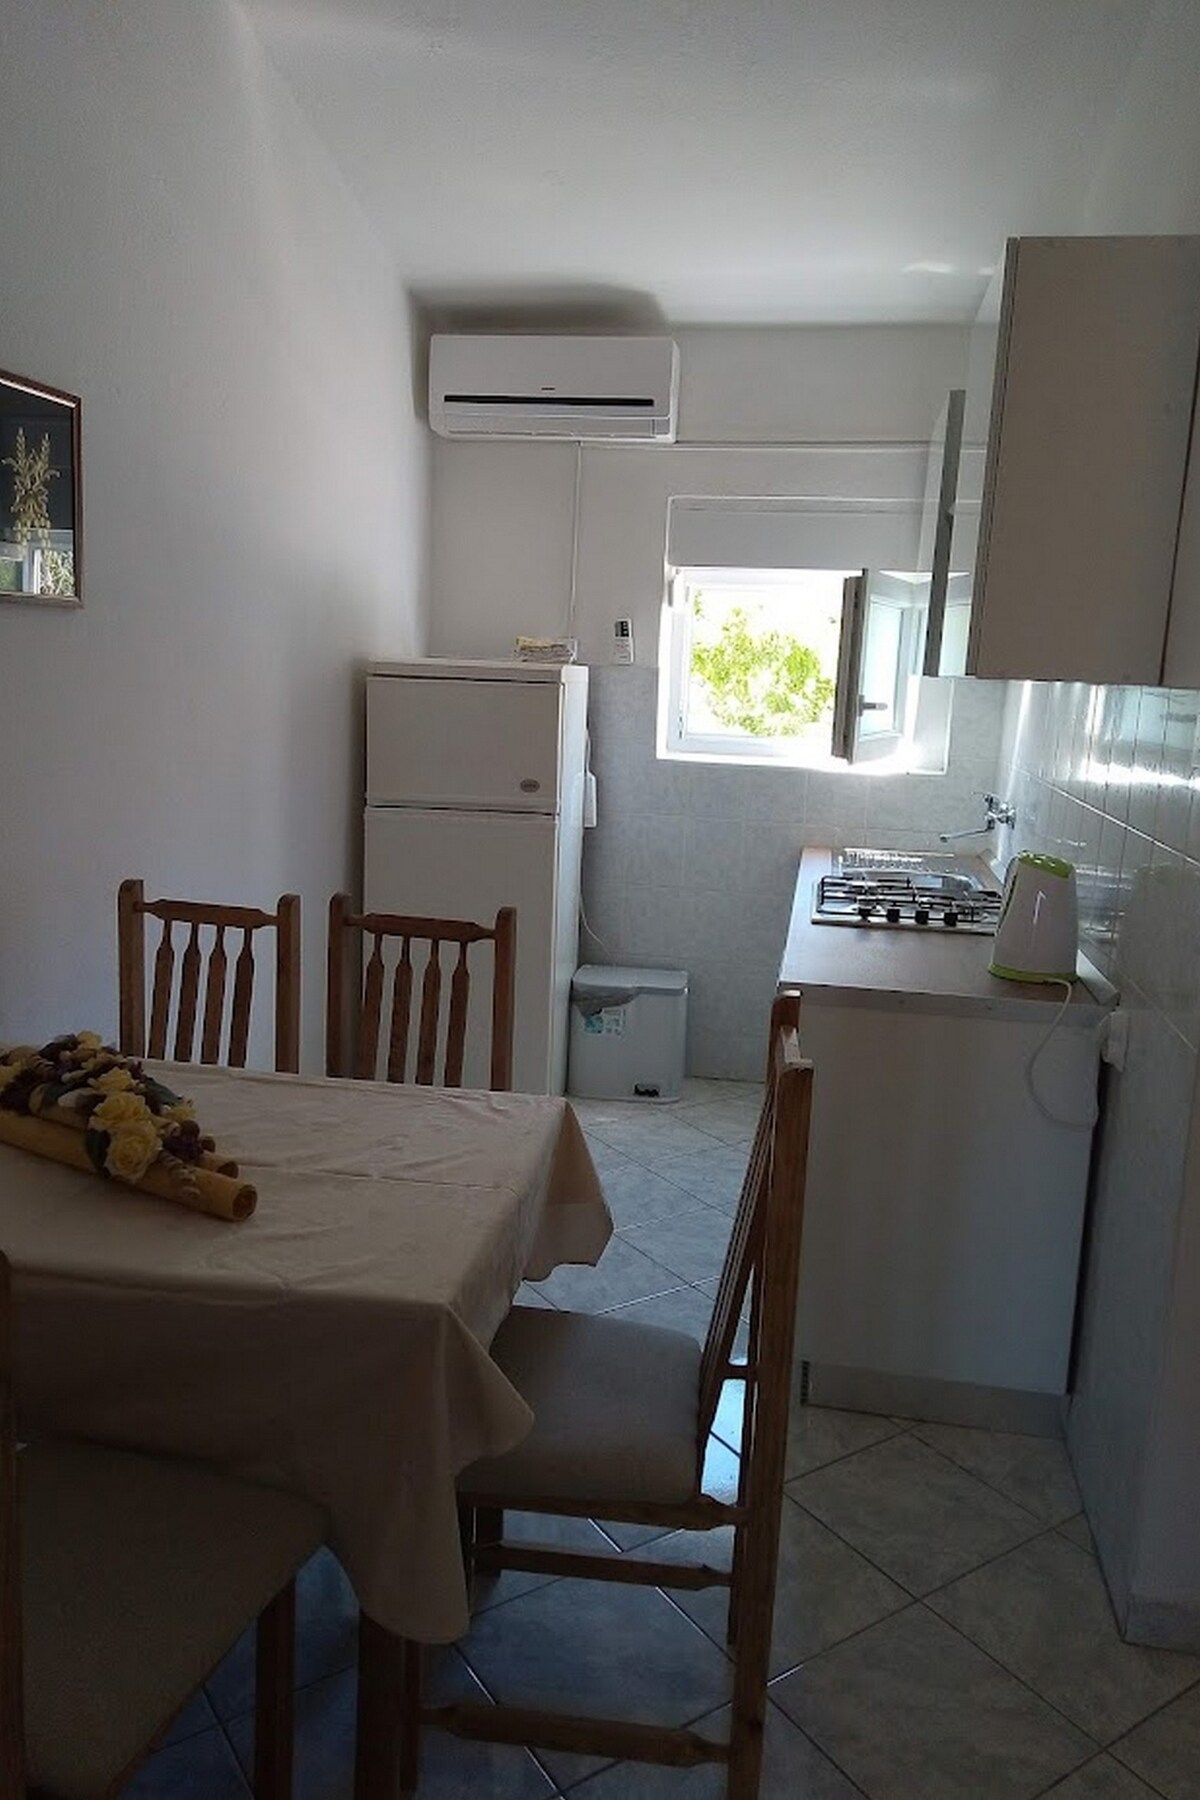 A-20577-b One bedroom apartment with balcony and